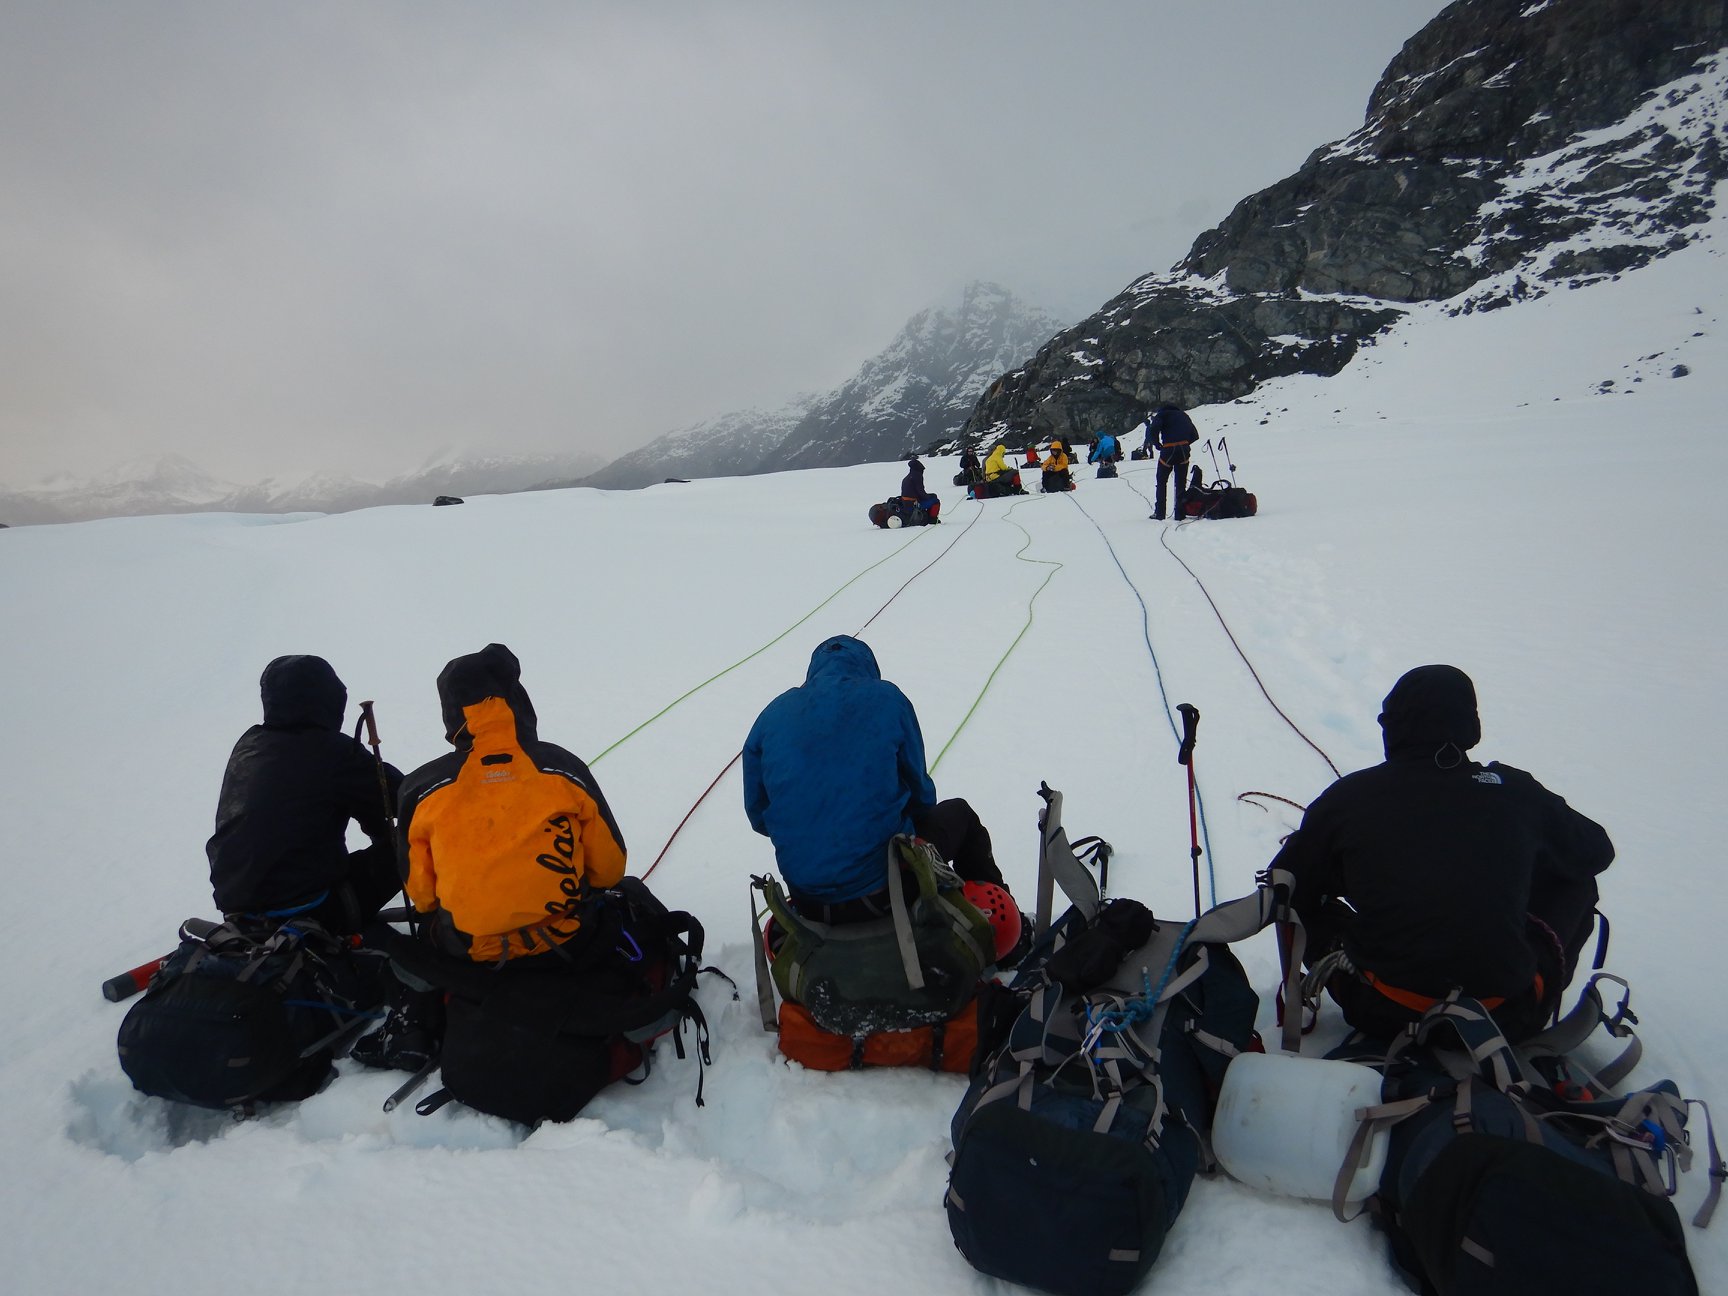 Four rope teams take a break on a glacier covered in snow